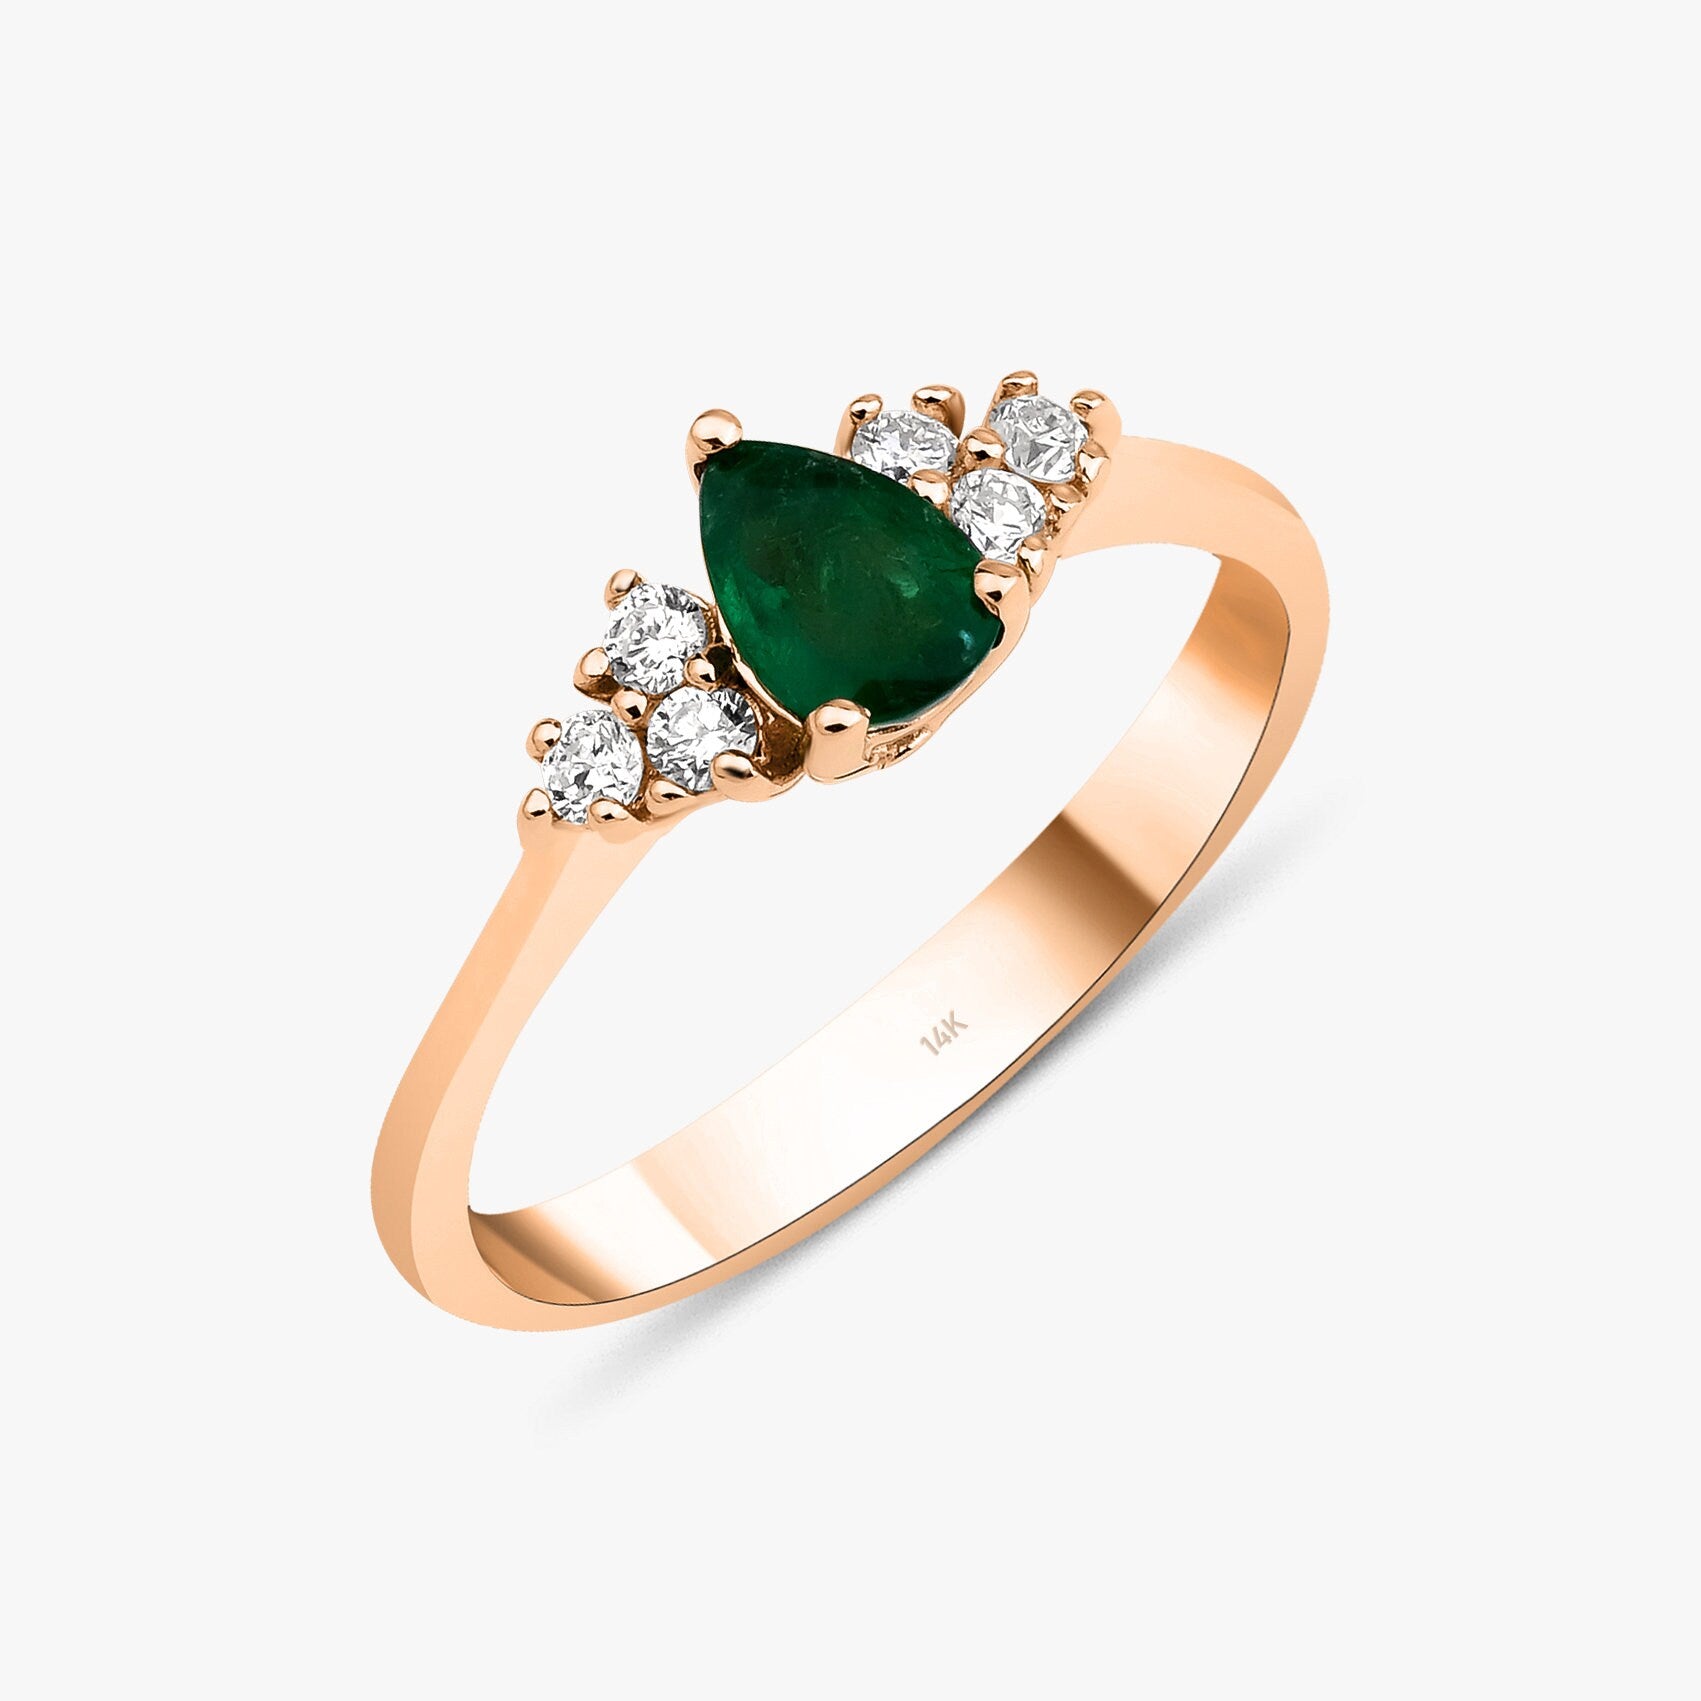 Pear Cut Emerald Ring With Diamonds in 14K Gold